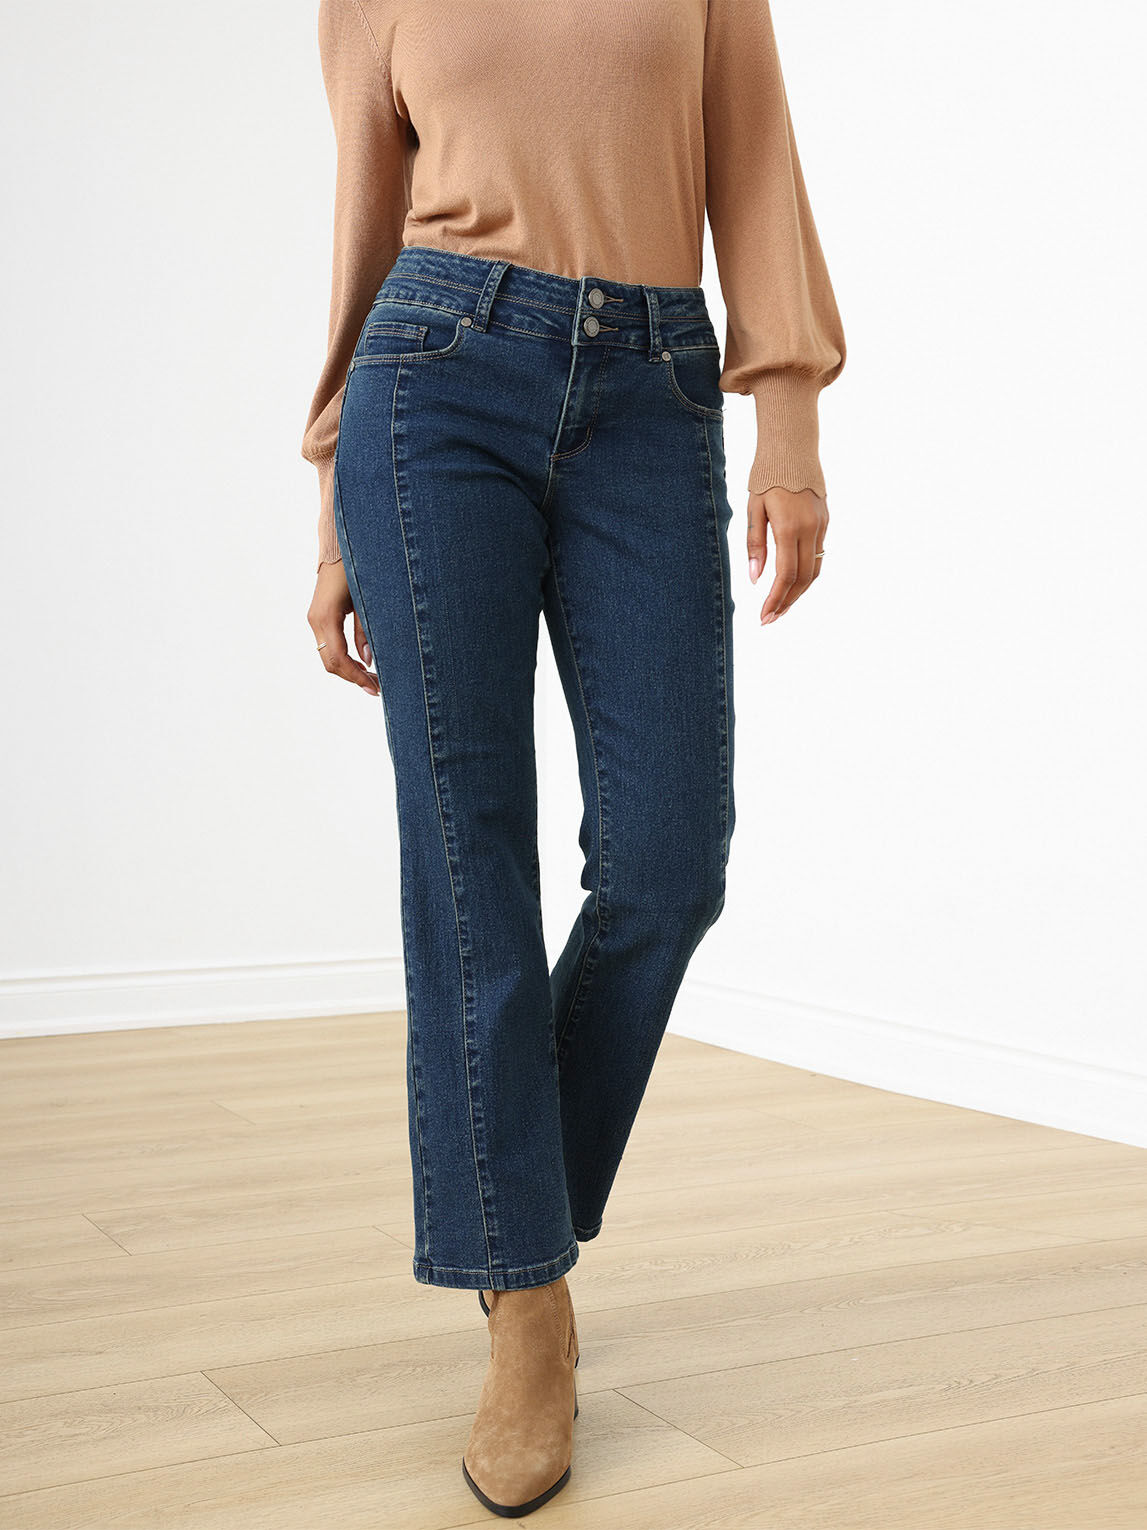 Vintage Wash Bootcut Butt Lift Jeans by GG